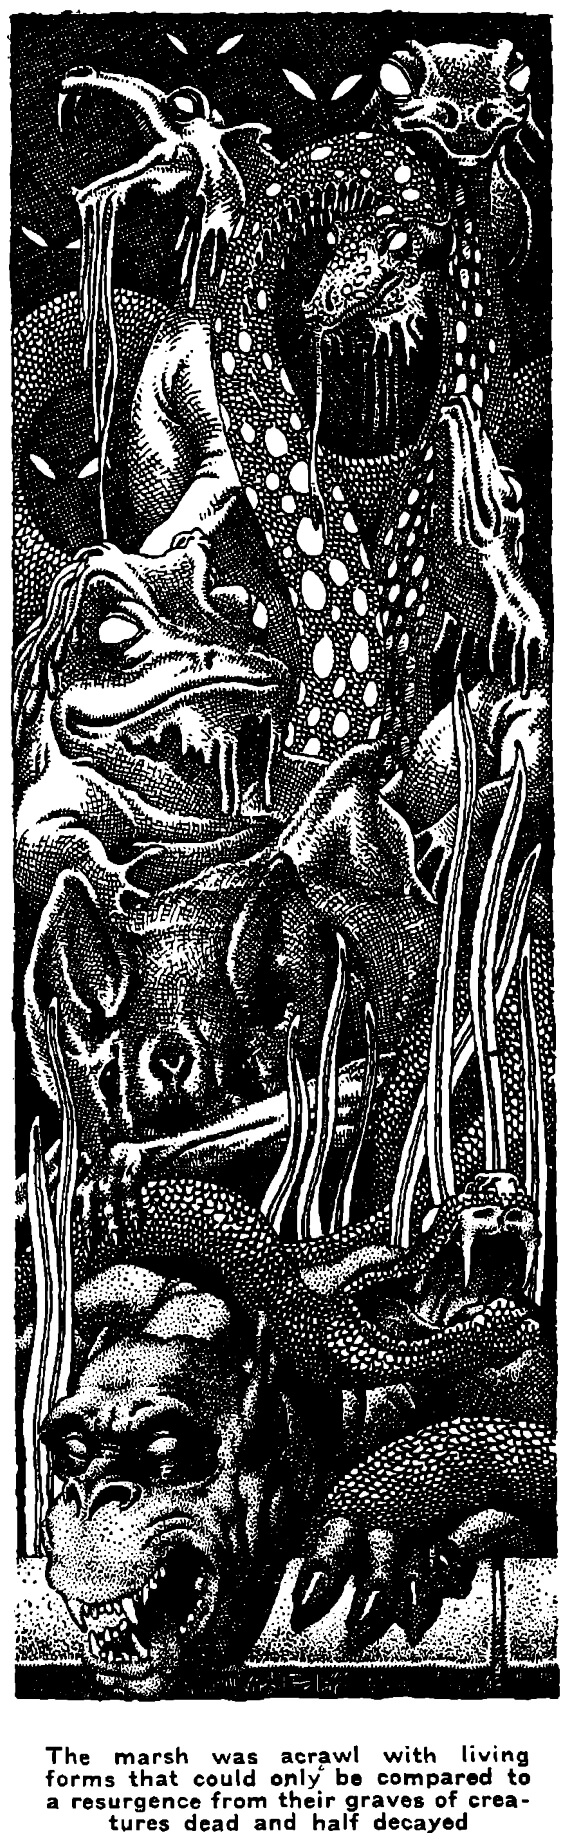 Famous Fantastic Mysteries - CITADEL OF FEAR by Franics Stevens - illustrated by Virgil Finlay